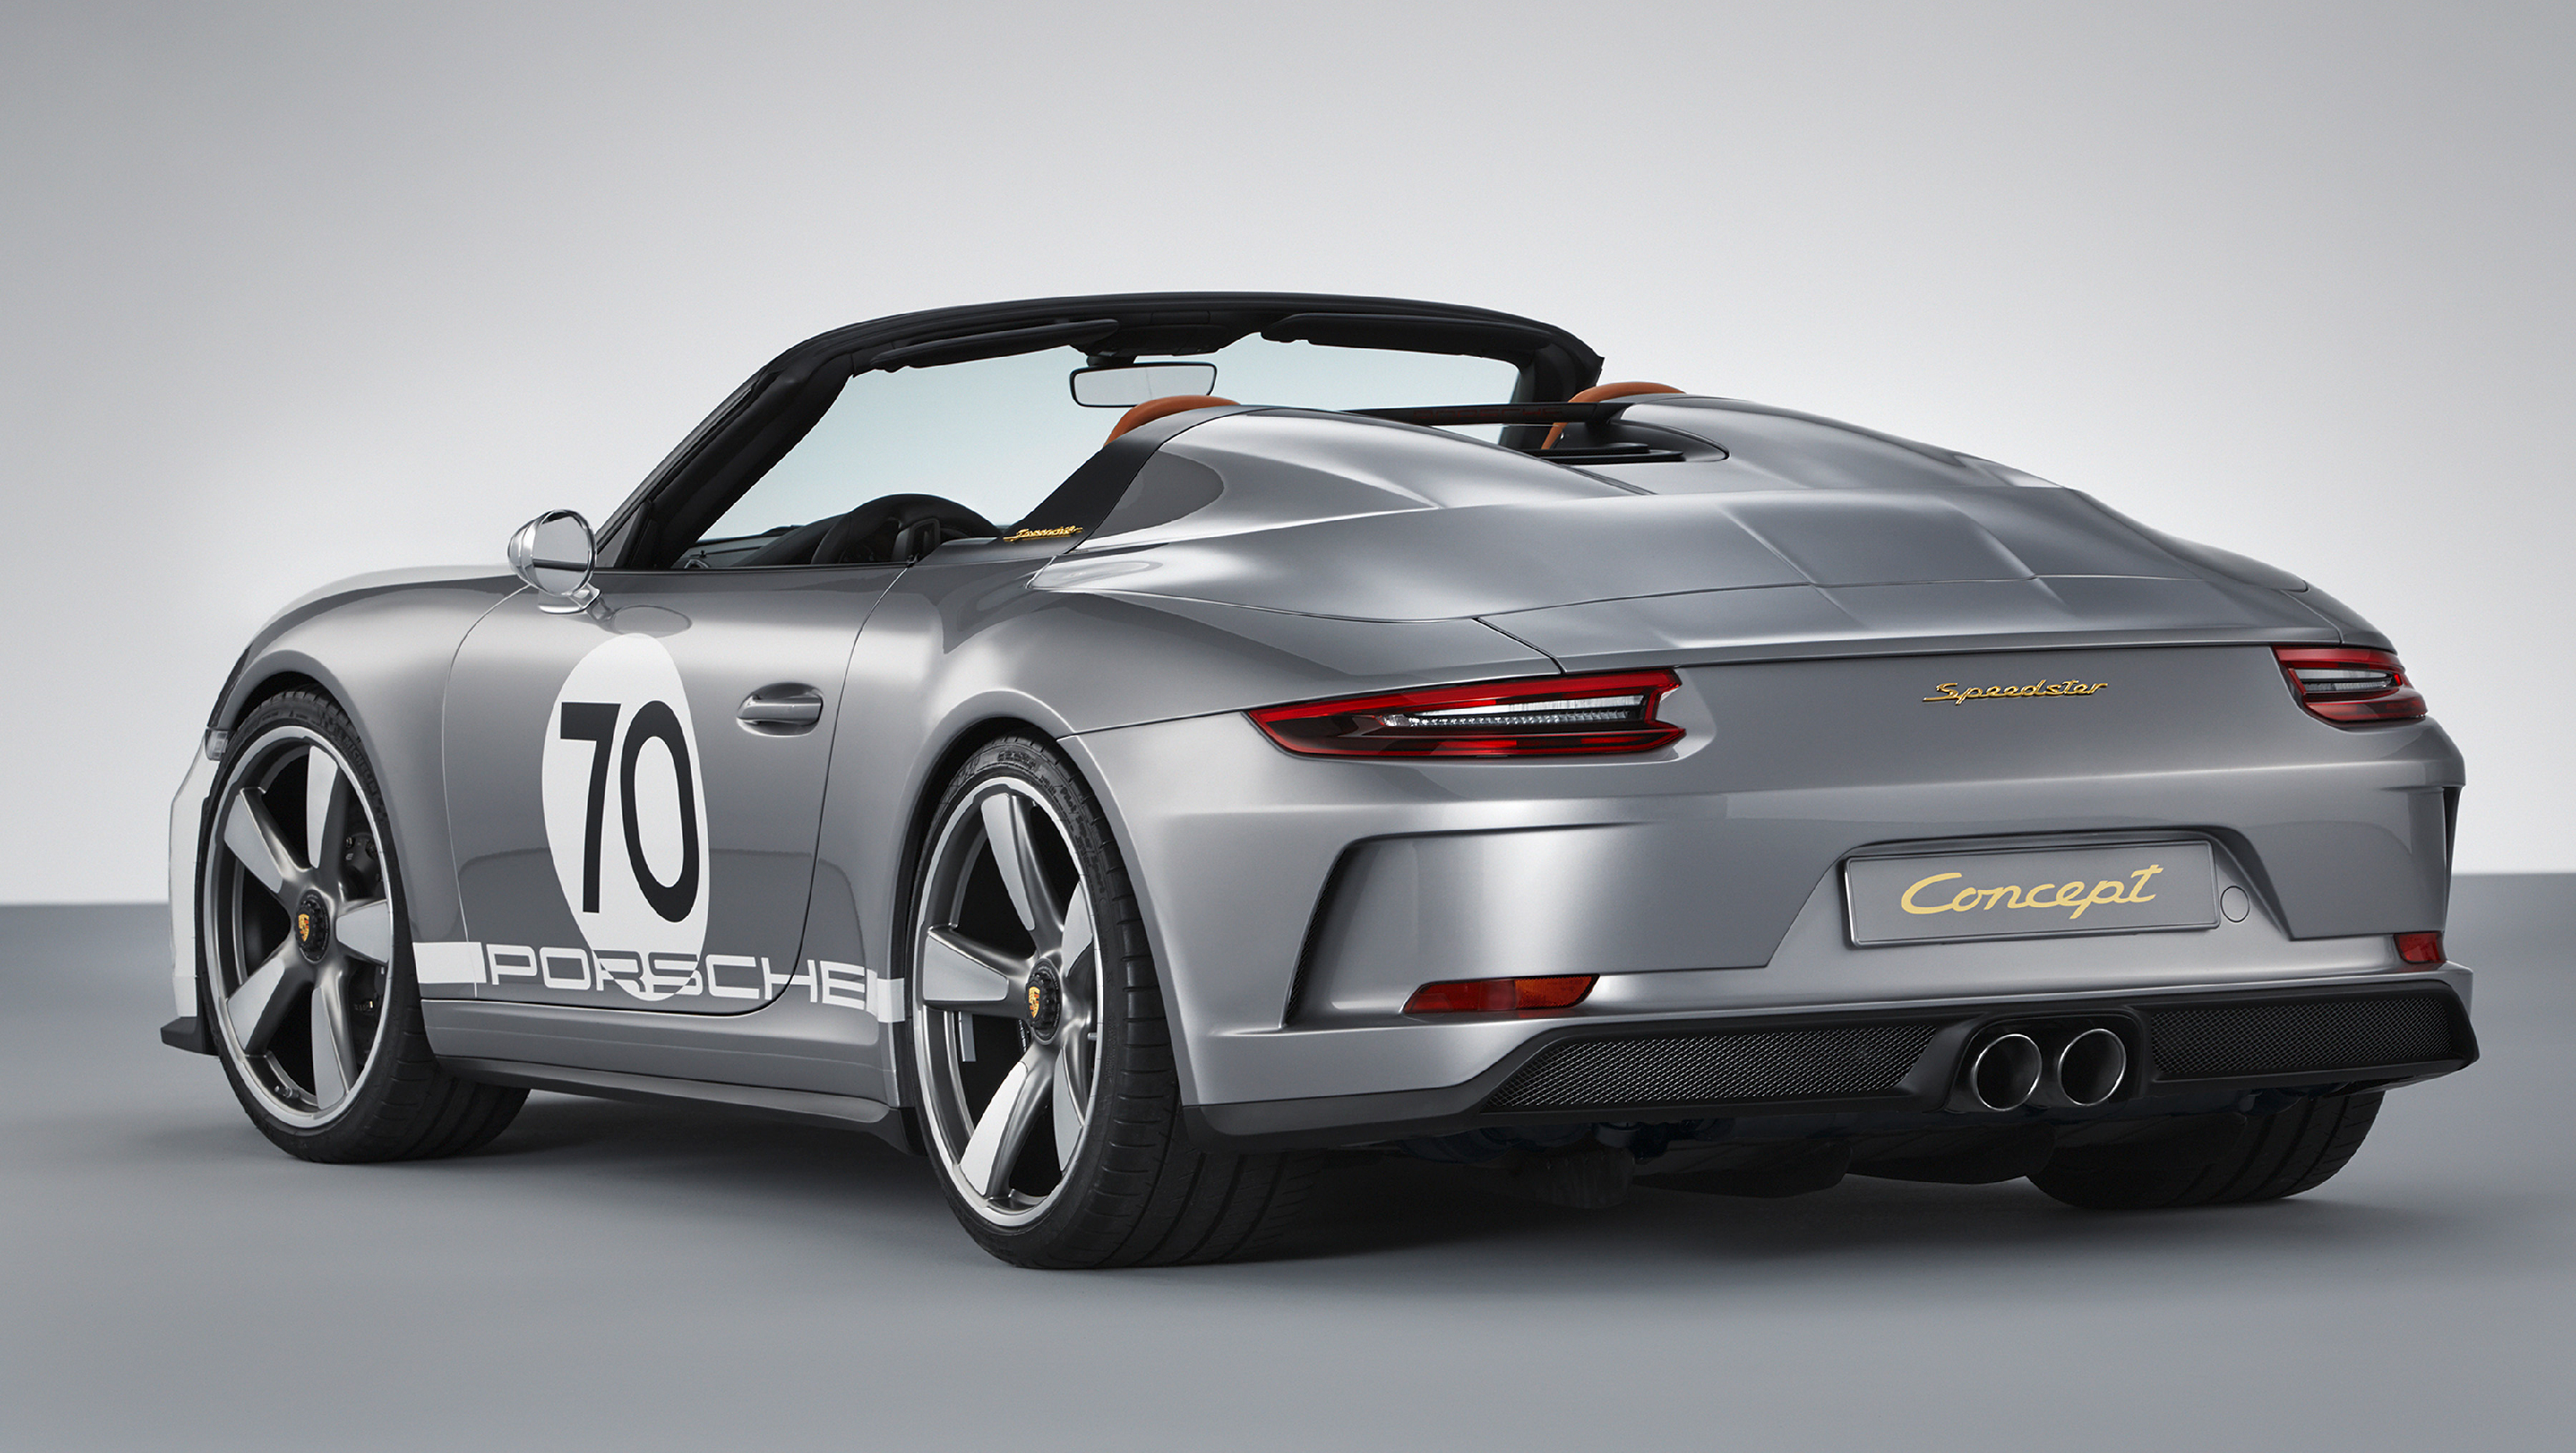 500hp porsche 911 speedster coming in 2019 as limited edition model 3583184 concept 2018 ag